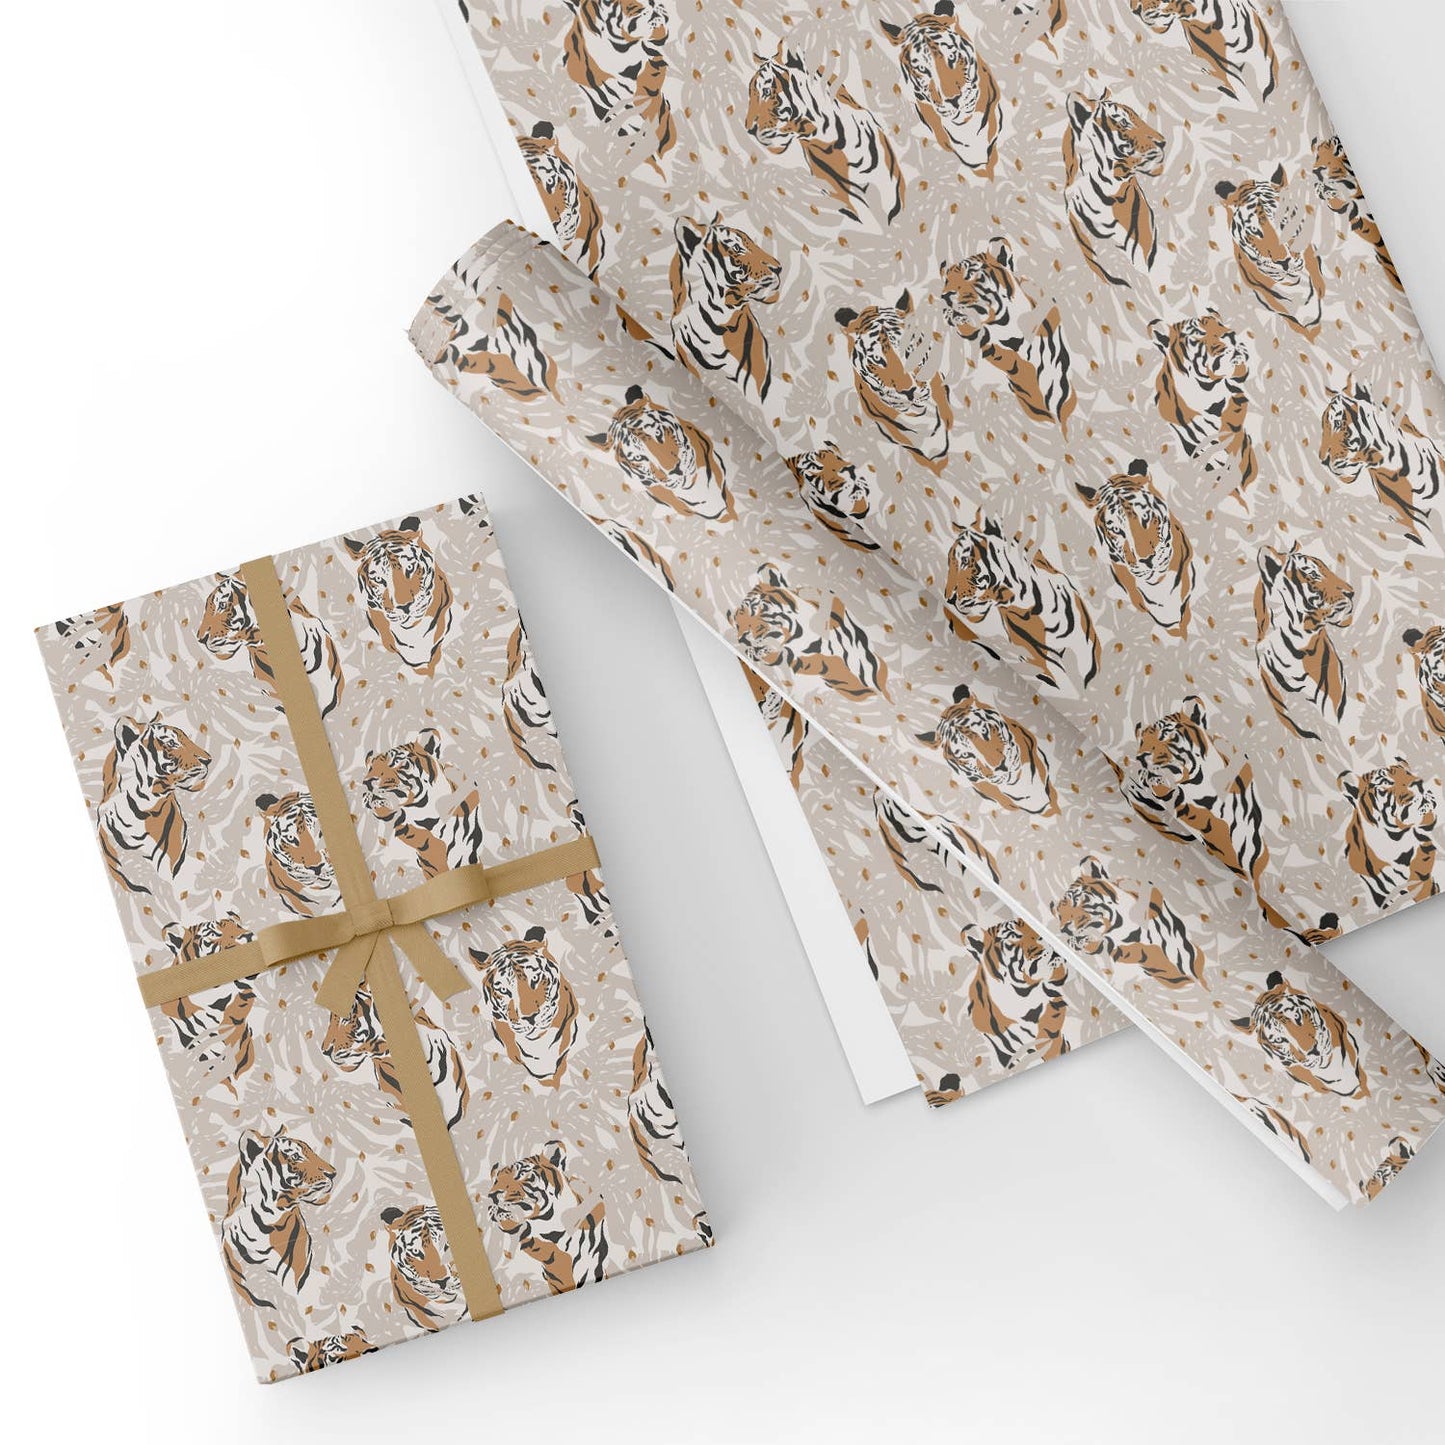 Gray and Brown Tigers Flat Wrapping Paper Sheet Wholesale Wraphaholic